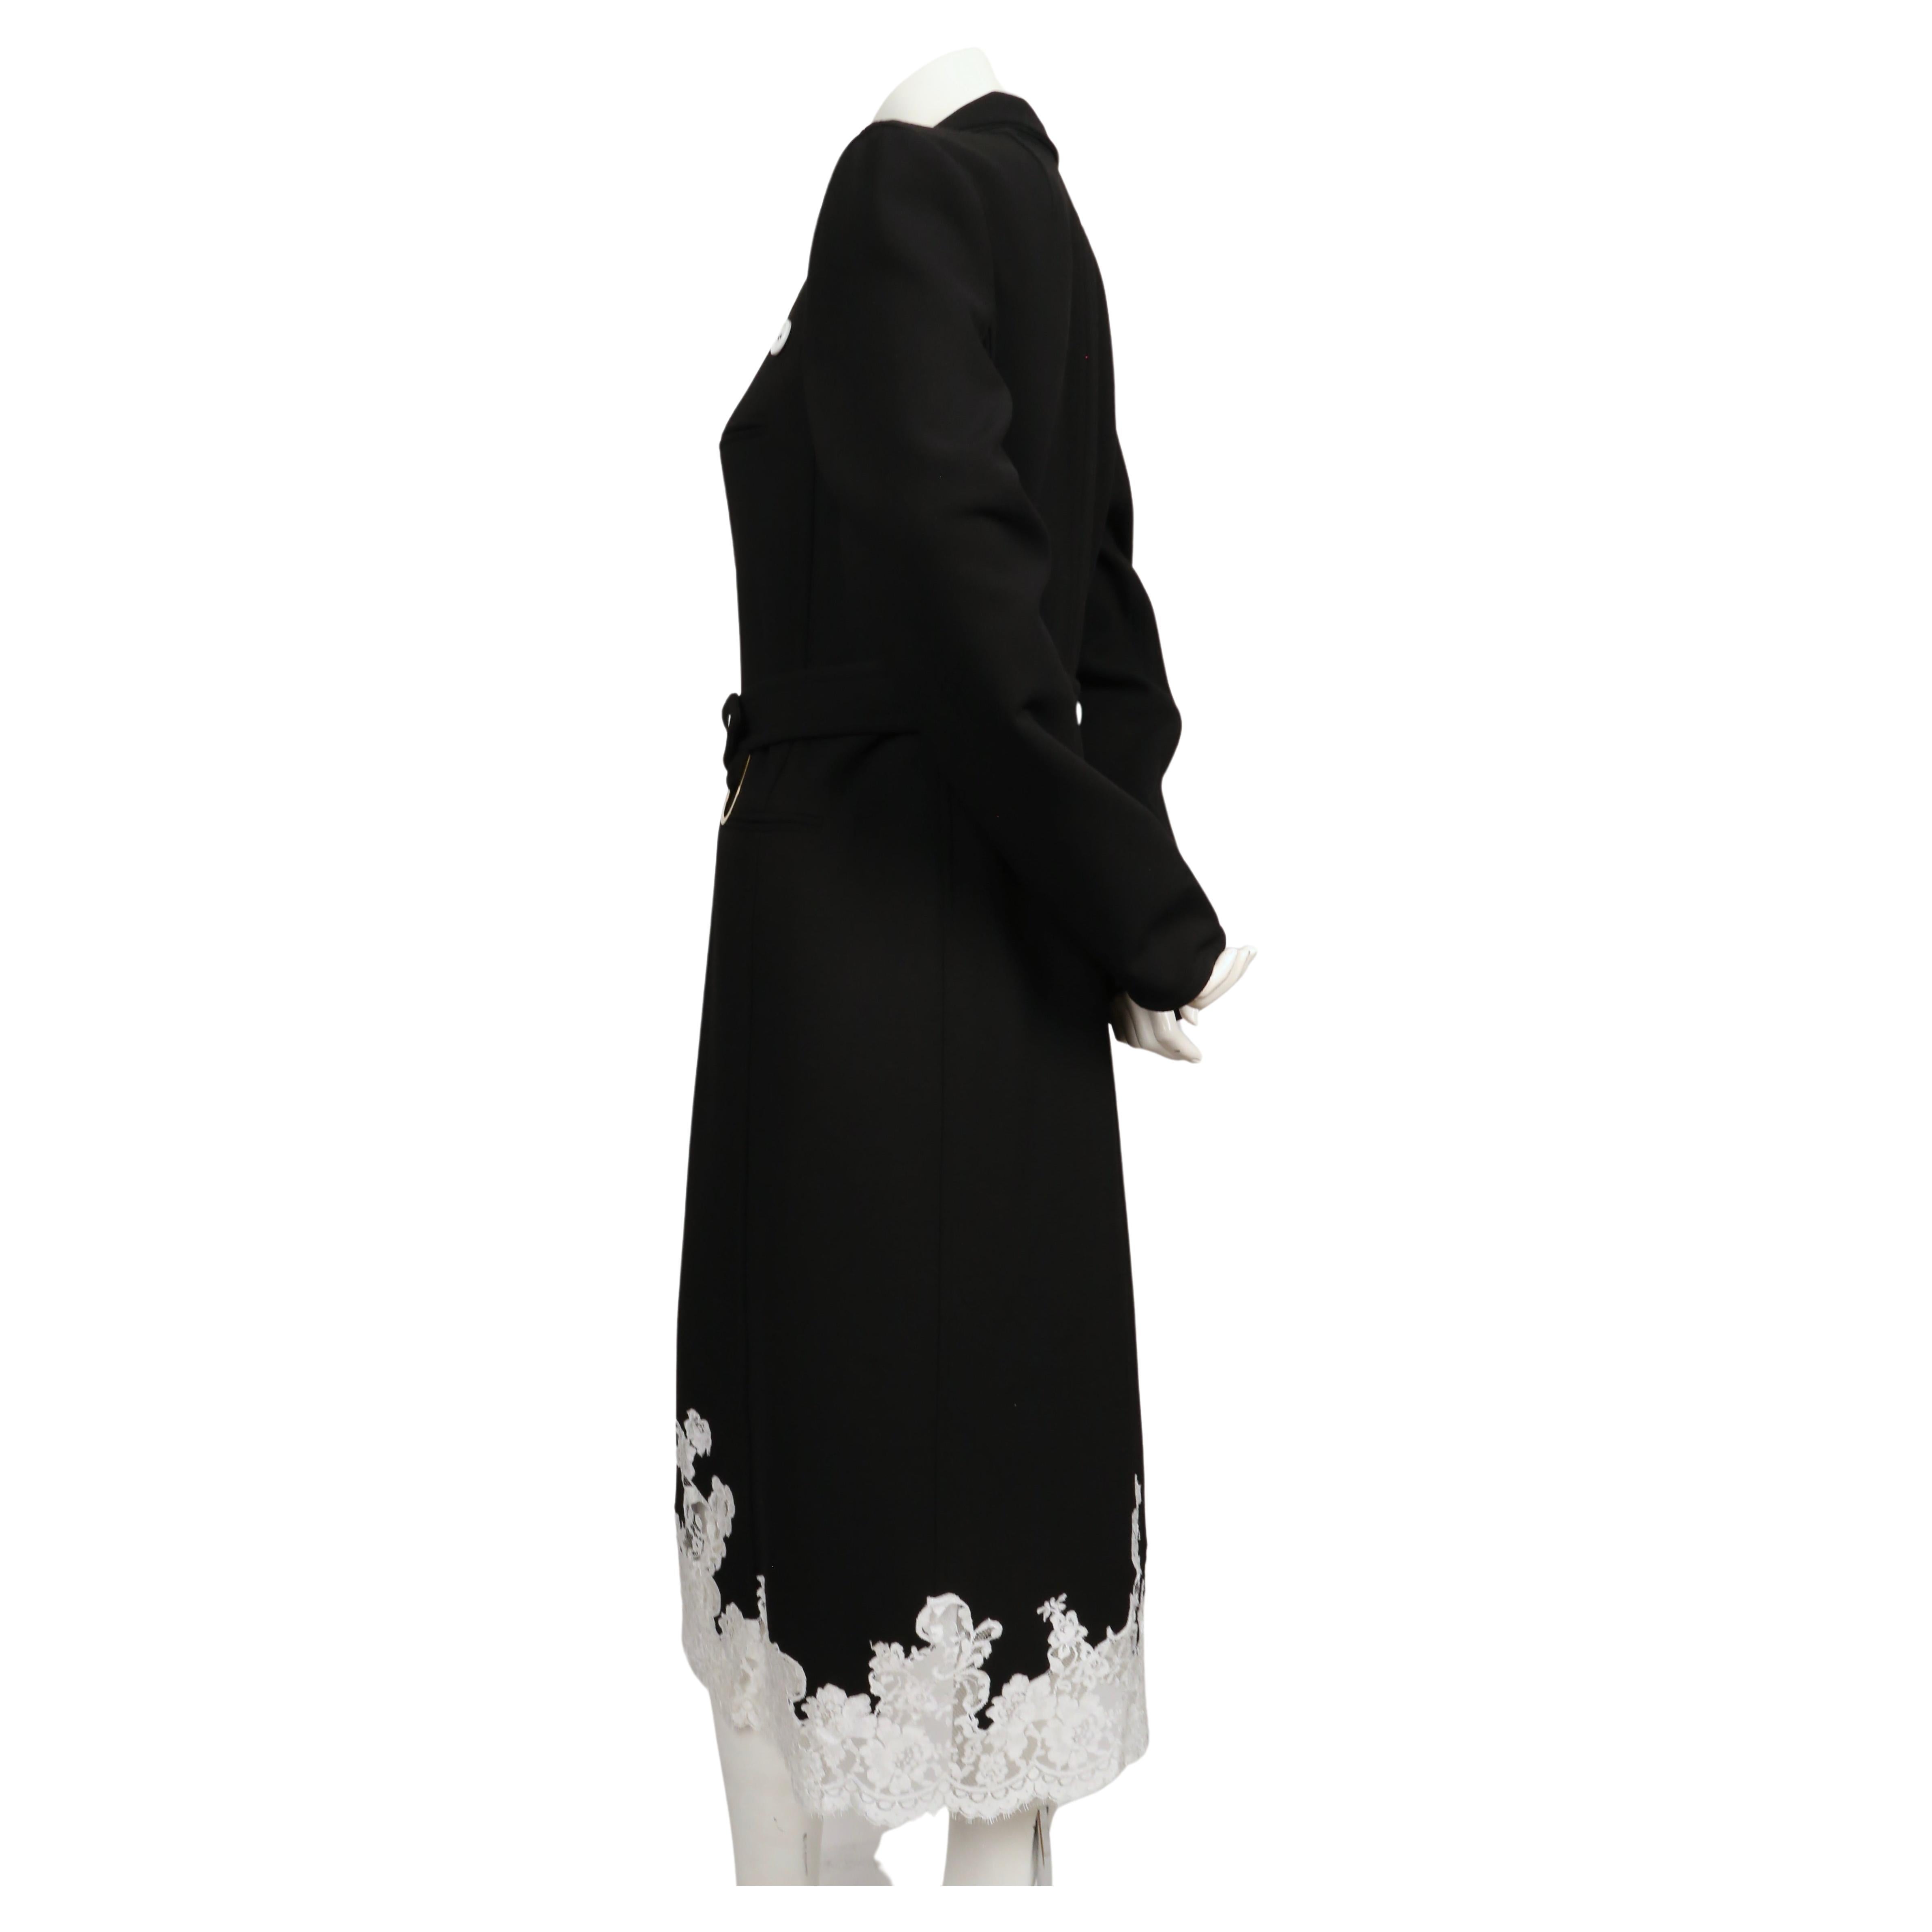 Women's or Men's new 2016 CELINE PHOEBE PHILO black stretch wool trench RUNWAY coat with lace  